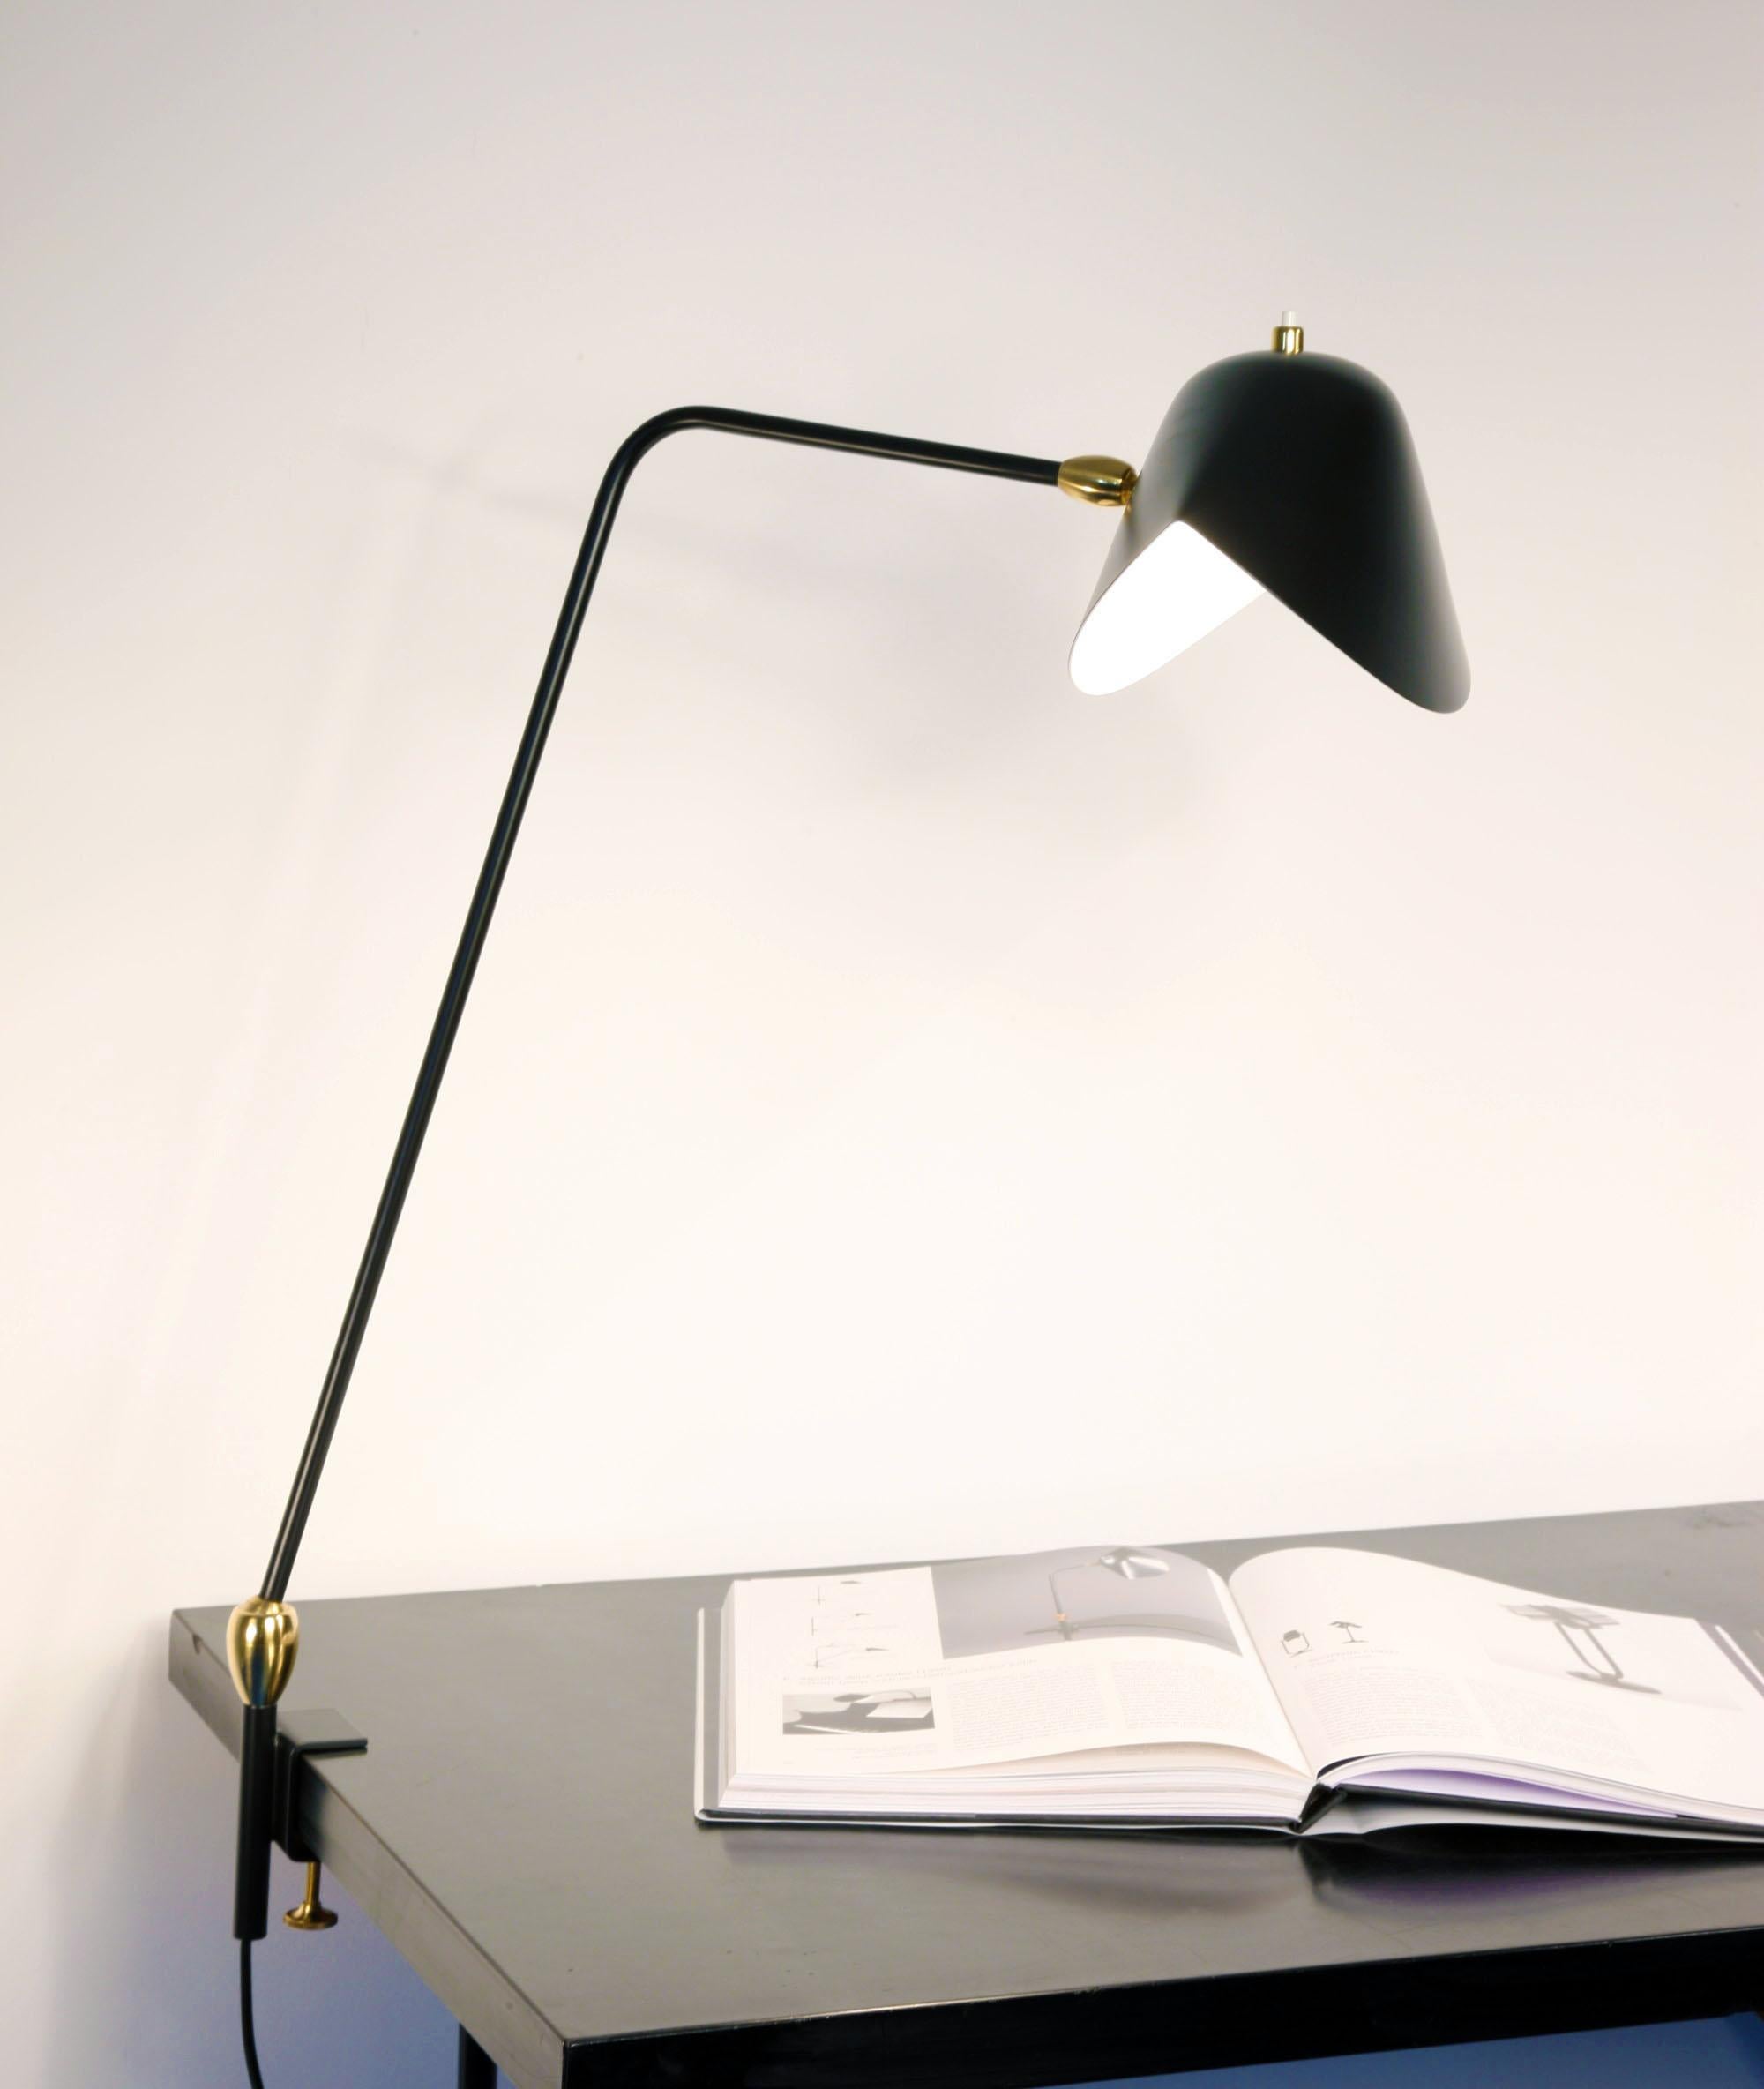 36 inches at its highest, this adjustable lamp may affix to many surfaces providing direct lighting where it is needed.

Brass swivels connect the shades.

Customization
No Customization possible on this model.

Switch options
The agrafee